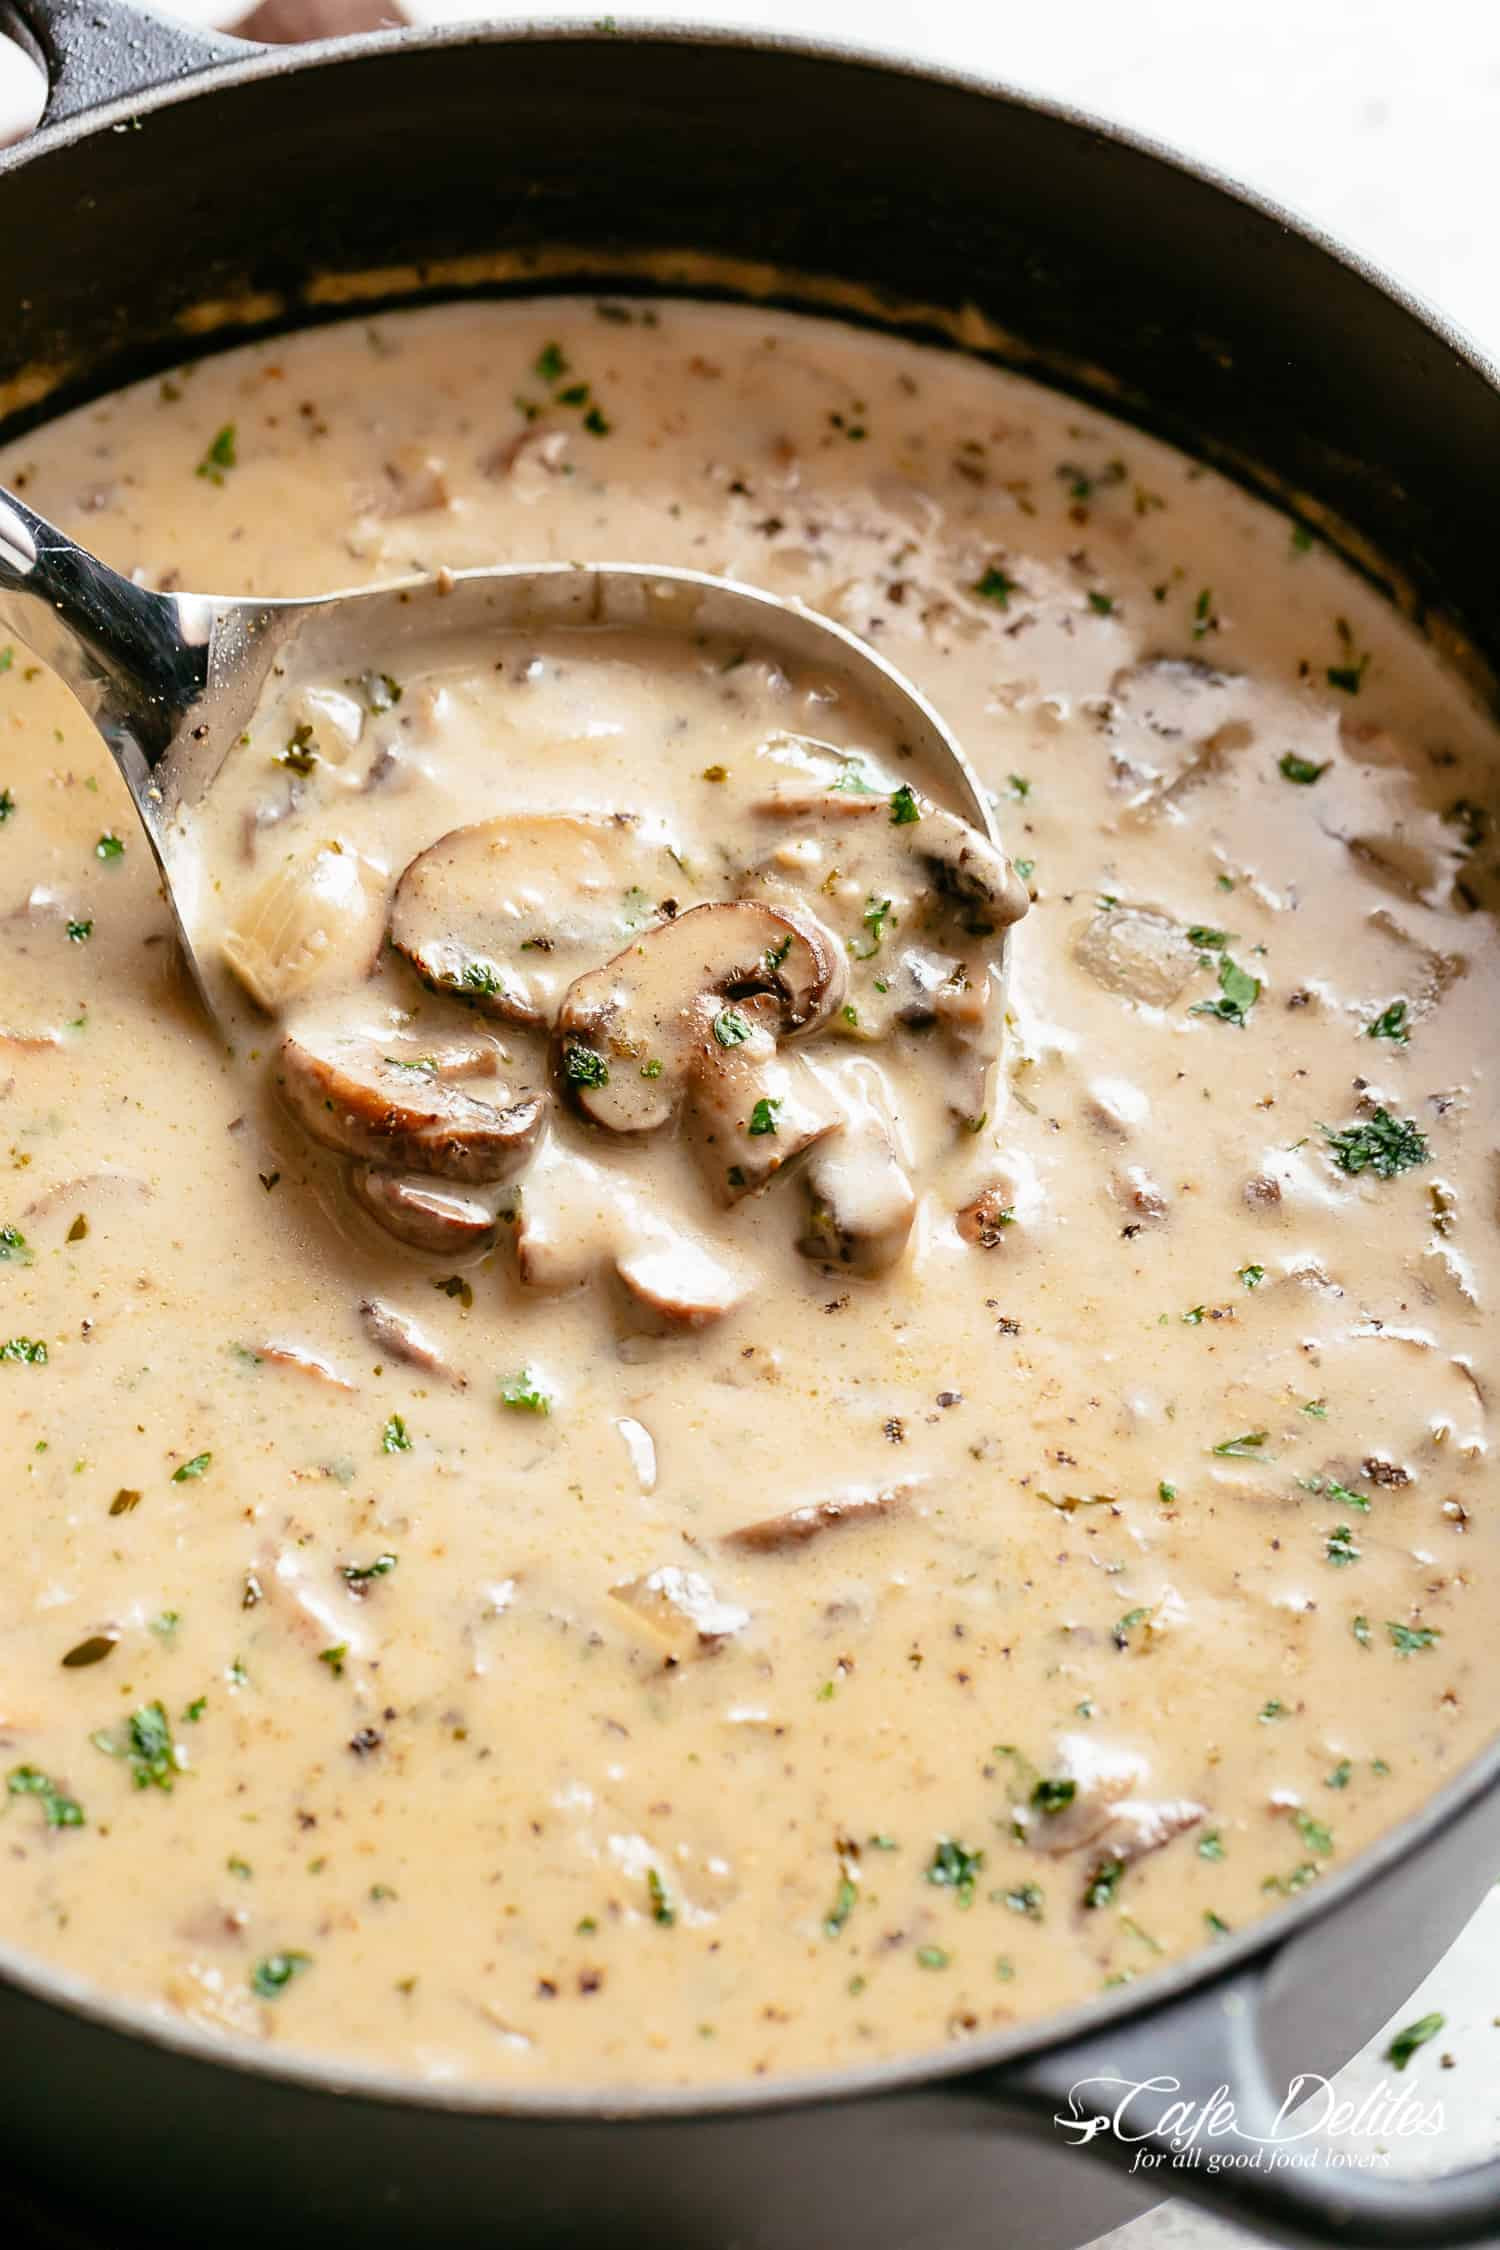 Recipes With Chicken And Cream Of Mushroom Soup
 Recipes Cafe Delites